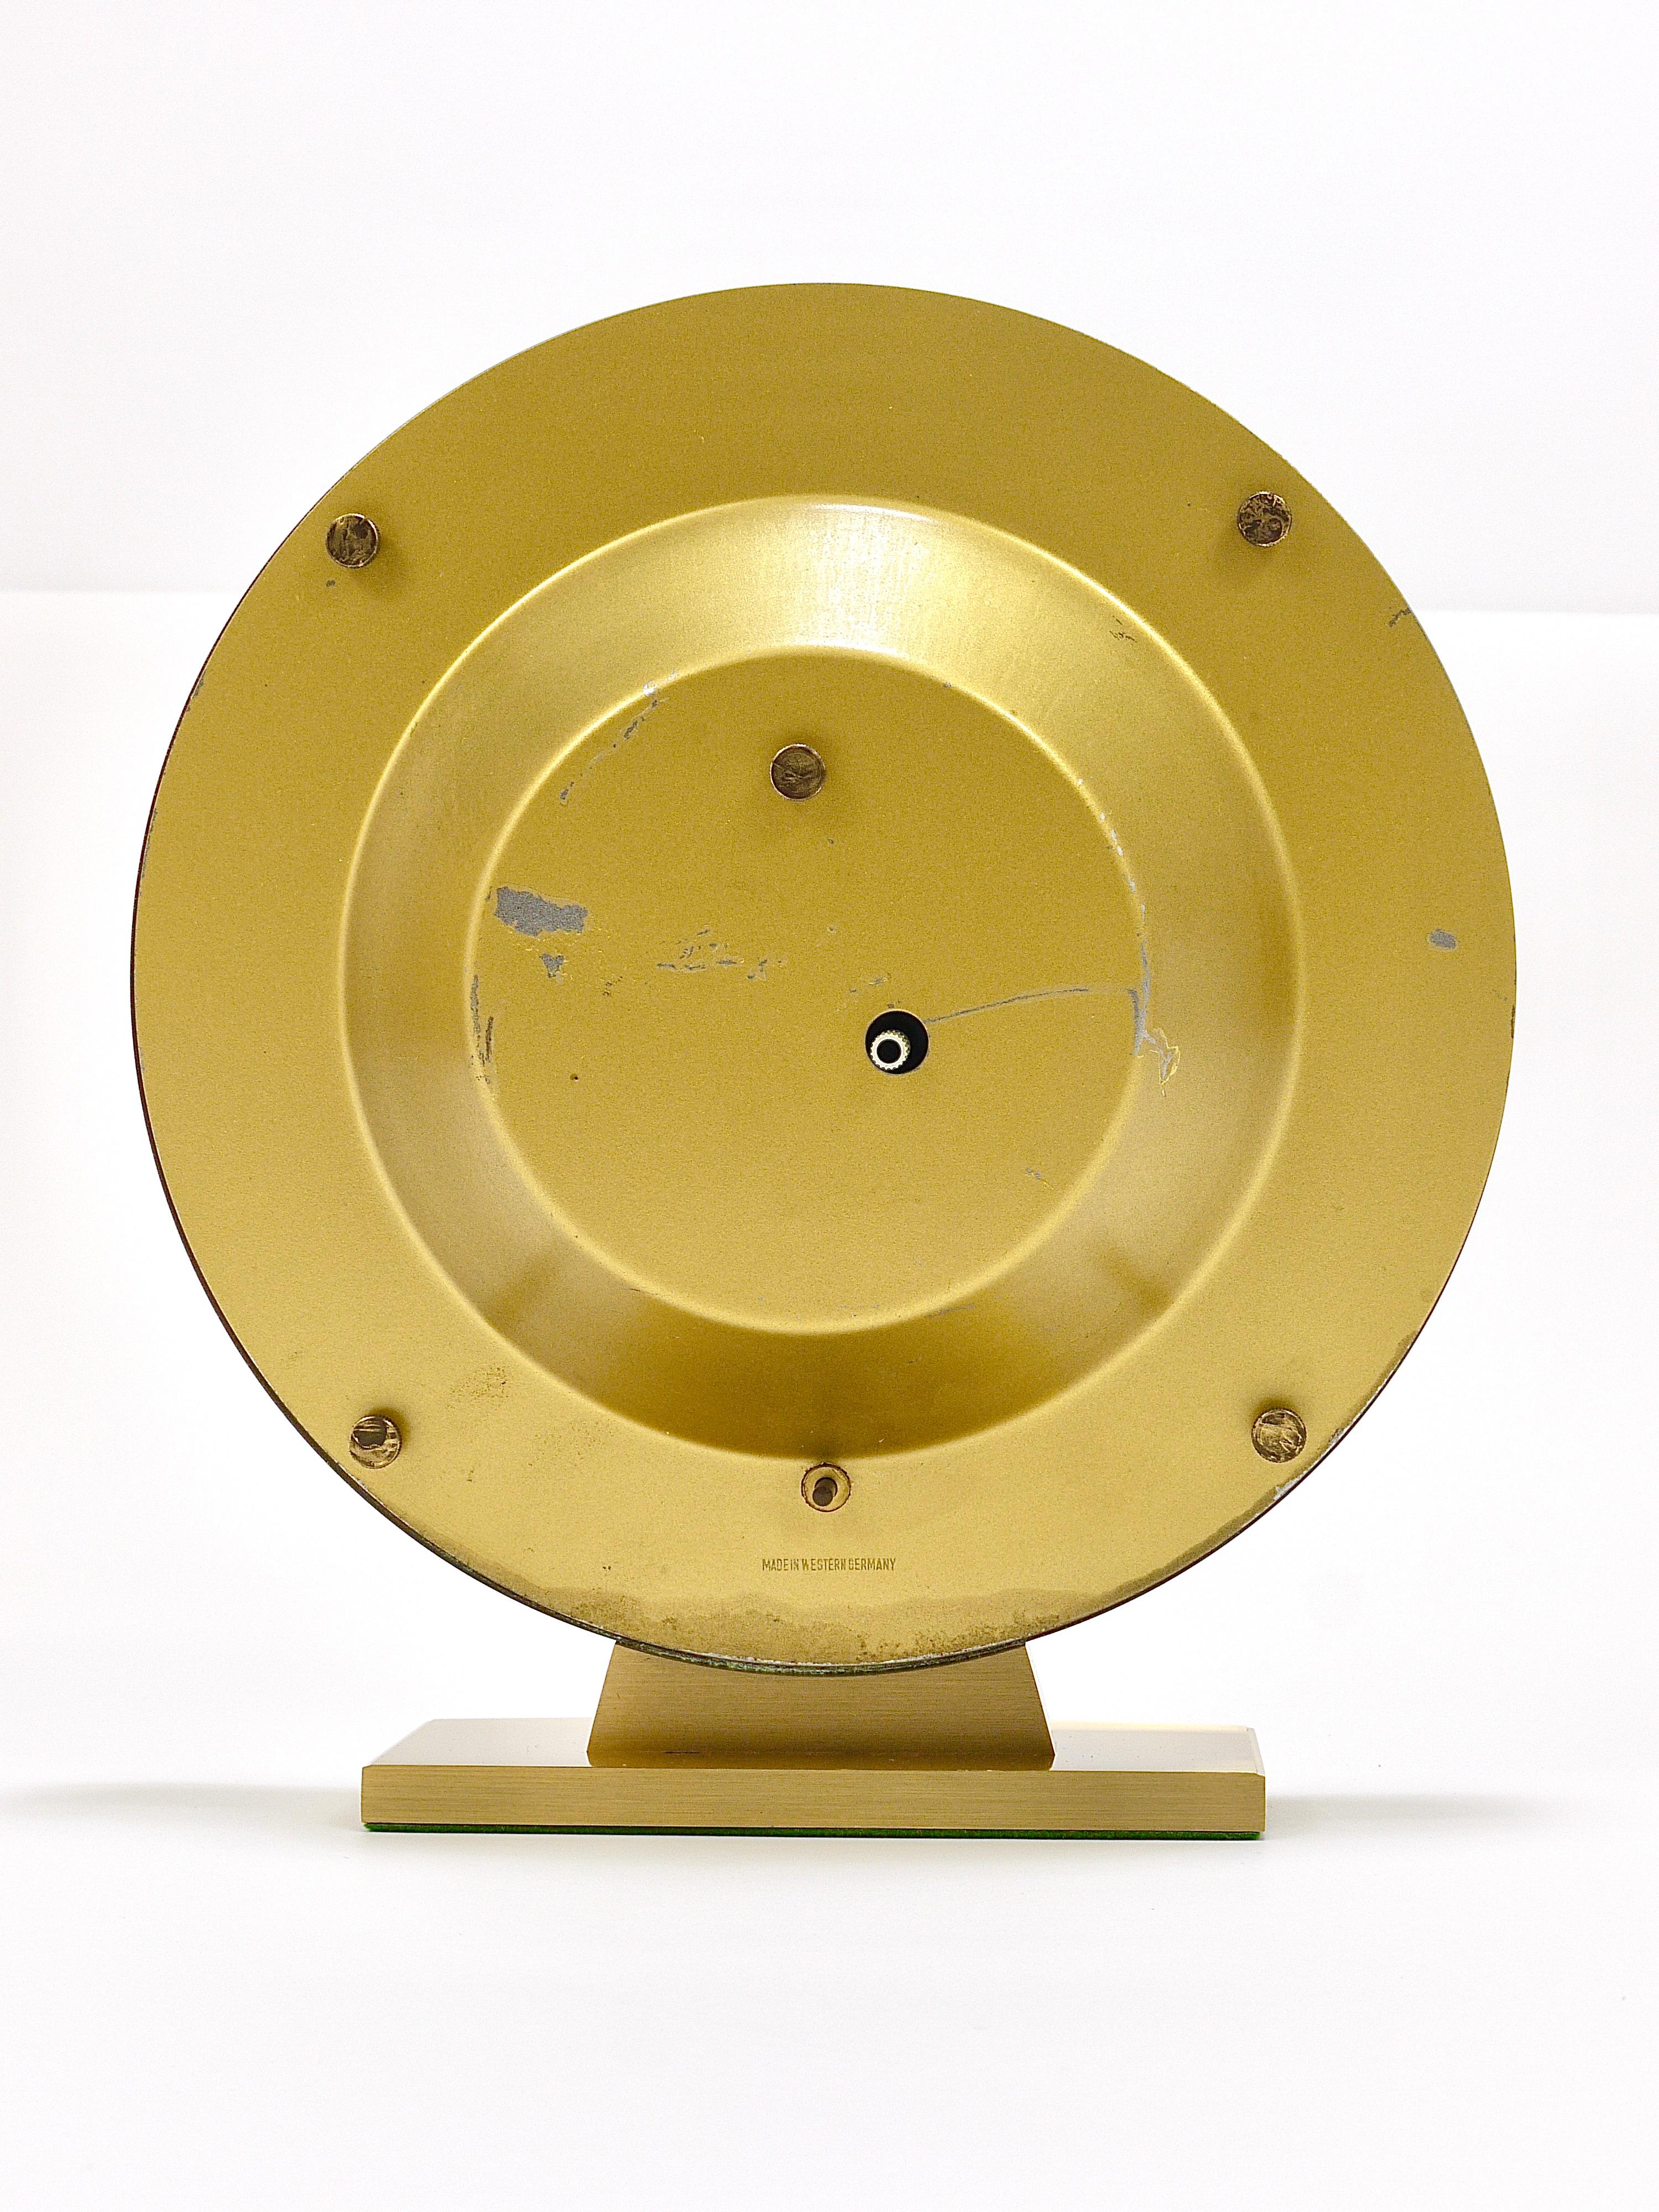 Large Kundo GMT World Time Zone Brass Table Clock, Kieninger & Obergfell, 1960s For Sale 6